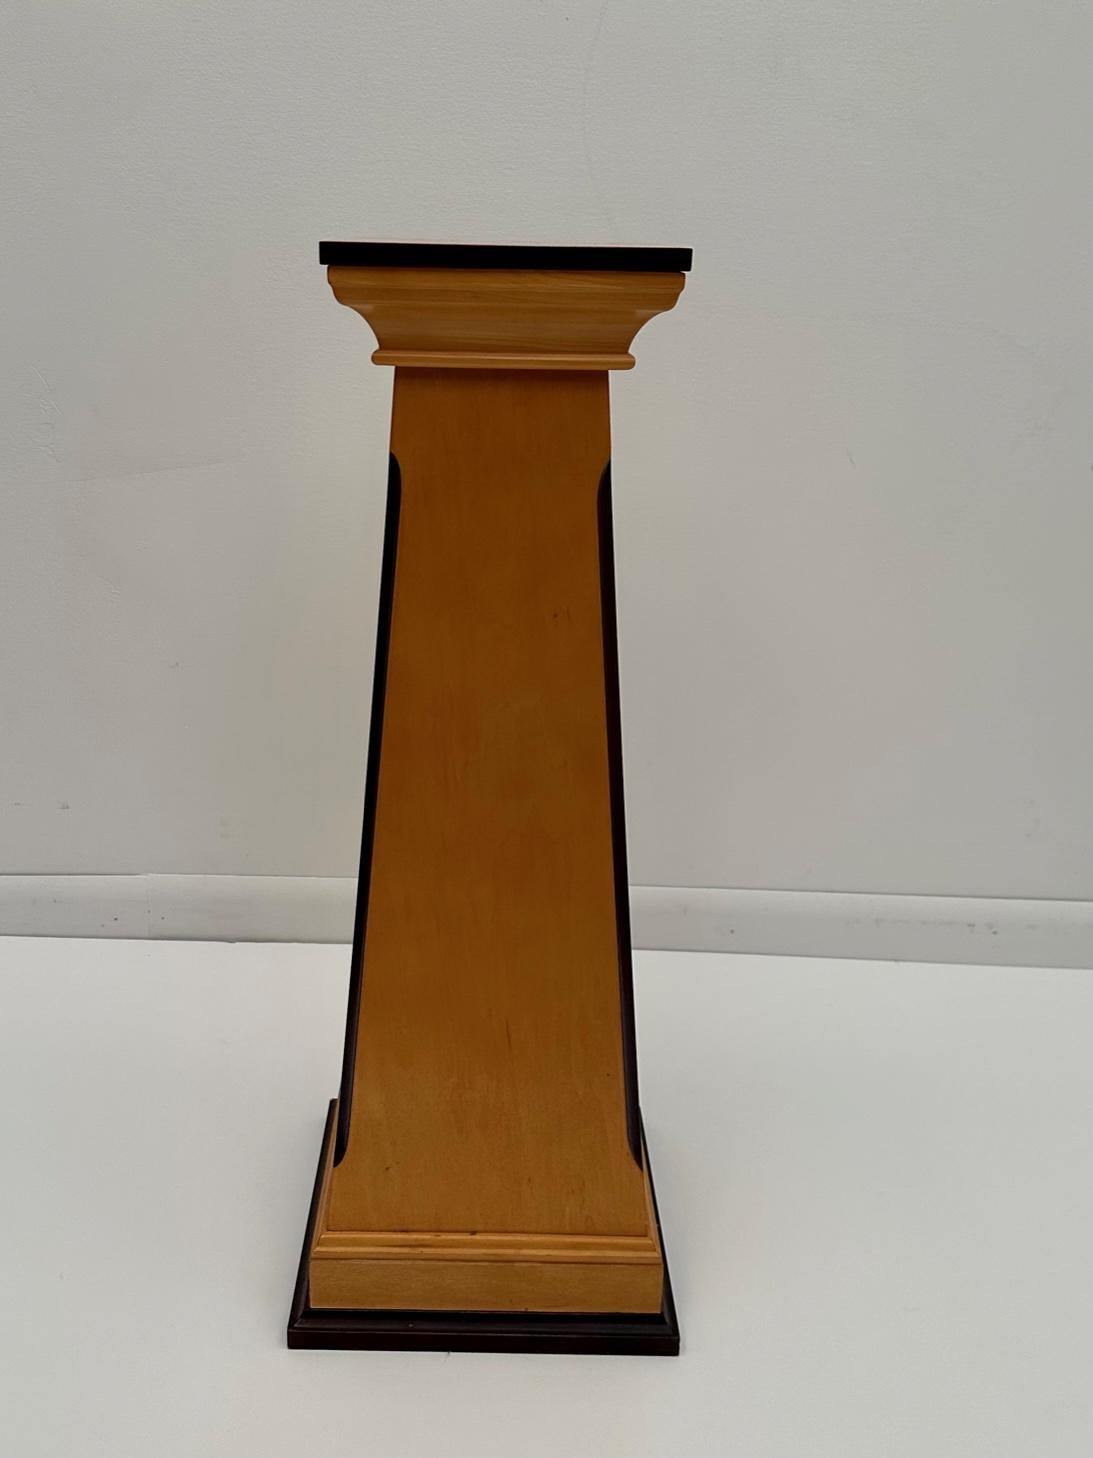 Sleek handcrafted maple pedestal with ebonized details; great for display.Top is 8.25 square.